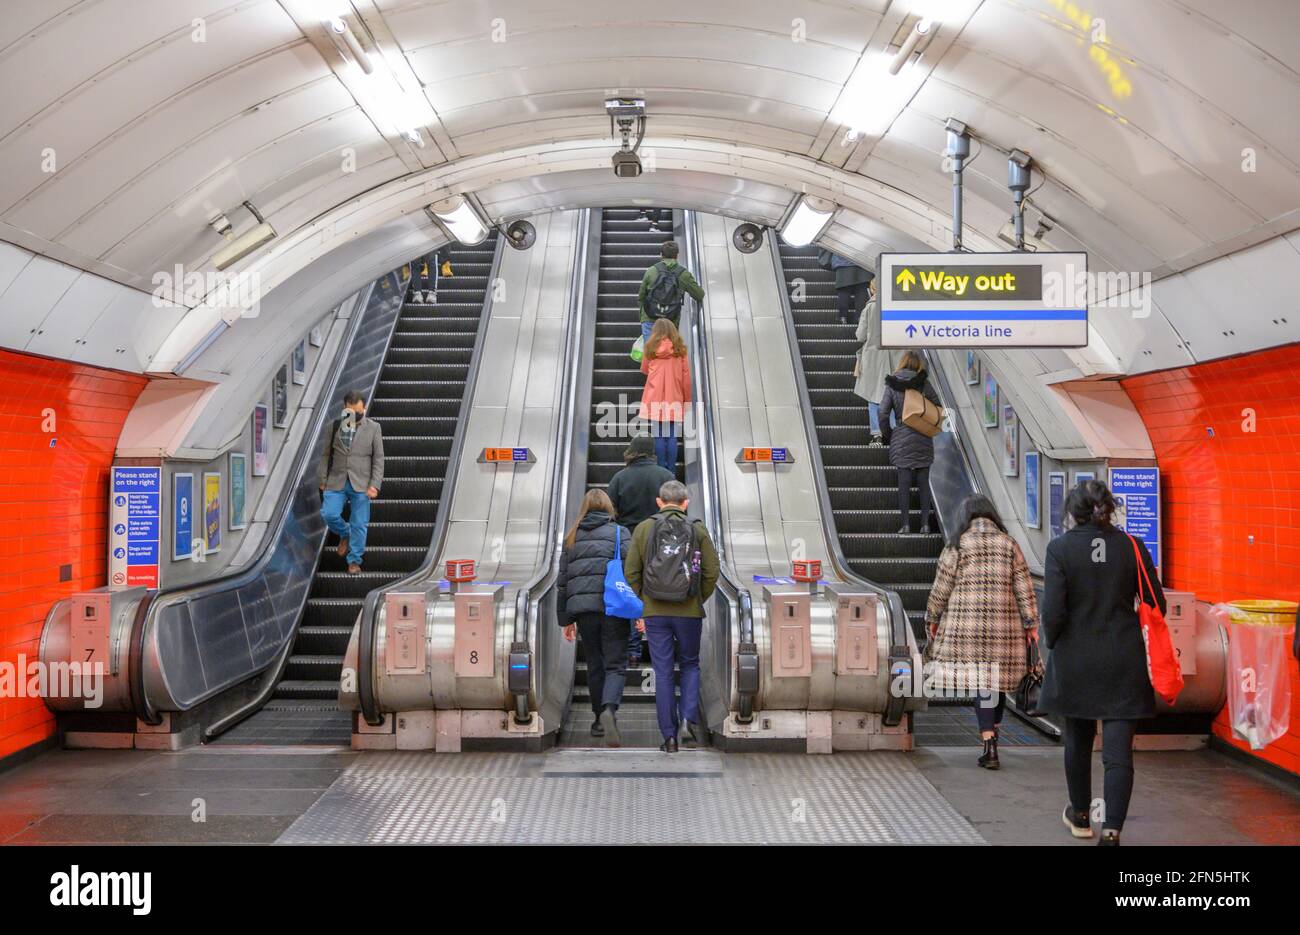 Oxford Street, London, UK. 14th May, 2021. More shoppers venturing into  central London as the capital opens up major galleries and museums from  18th May. Image: Shoppers using the escalators at Oxford